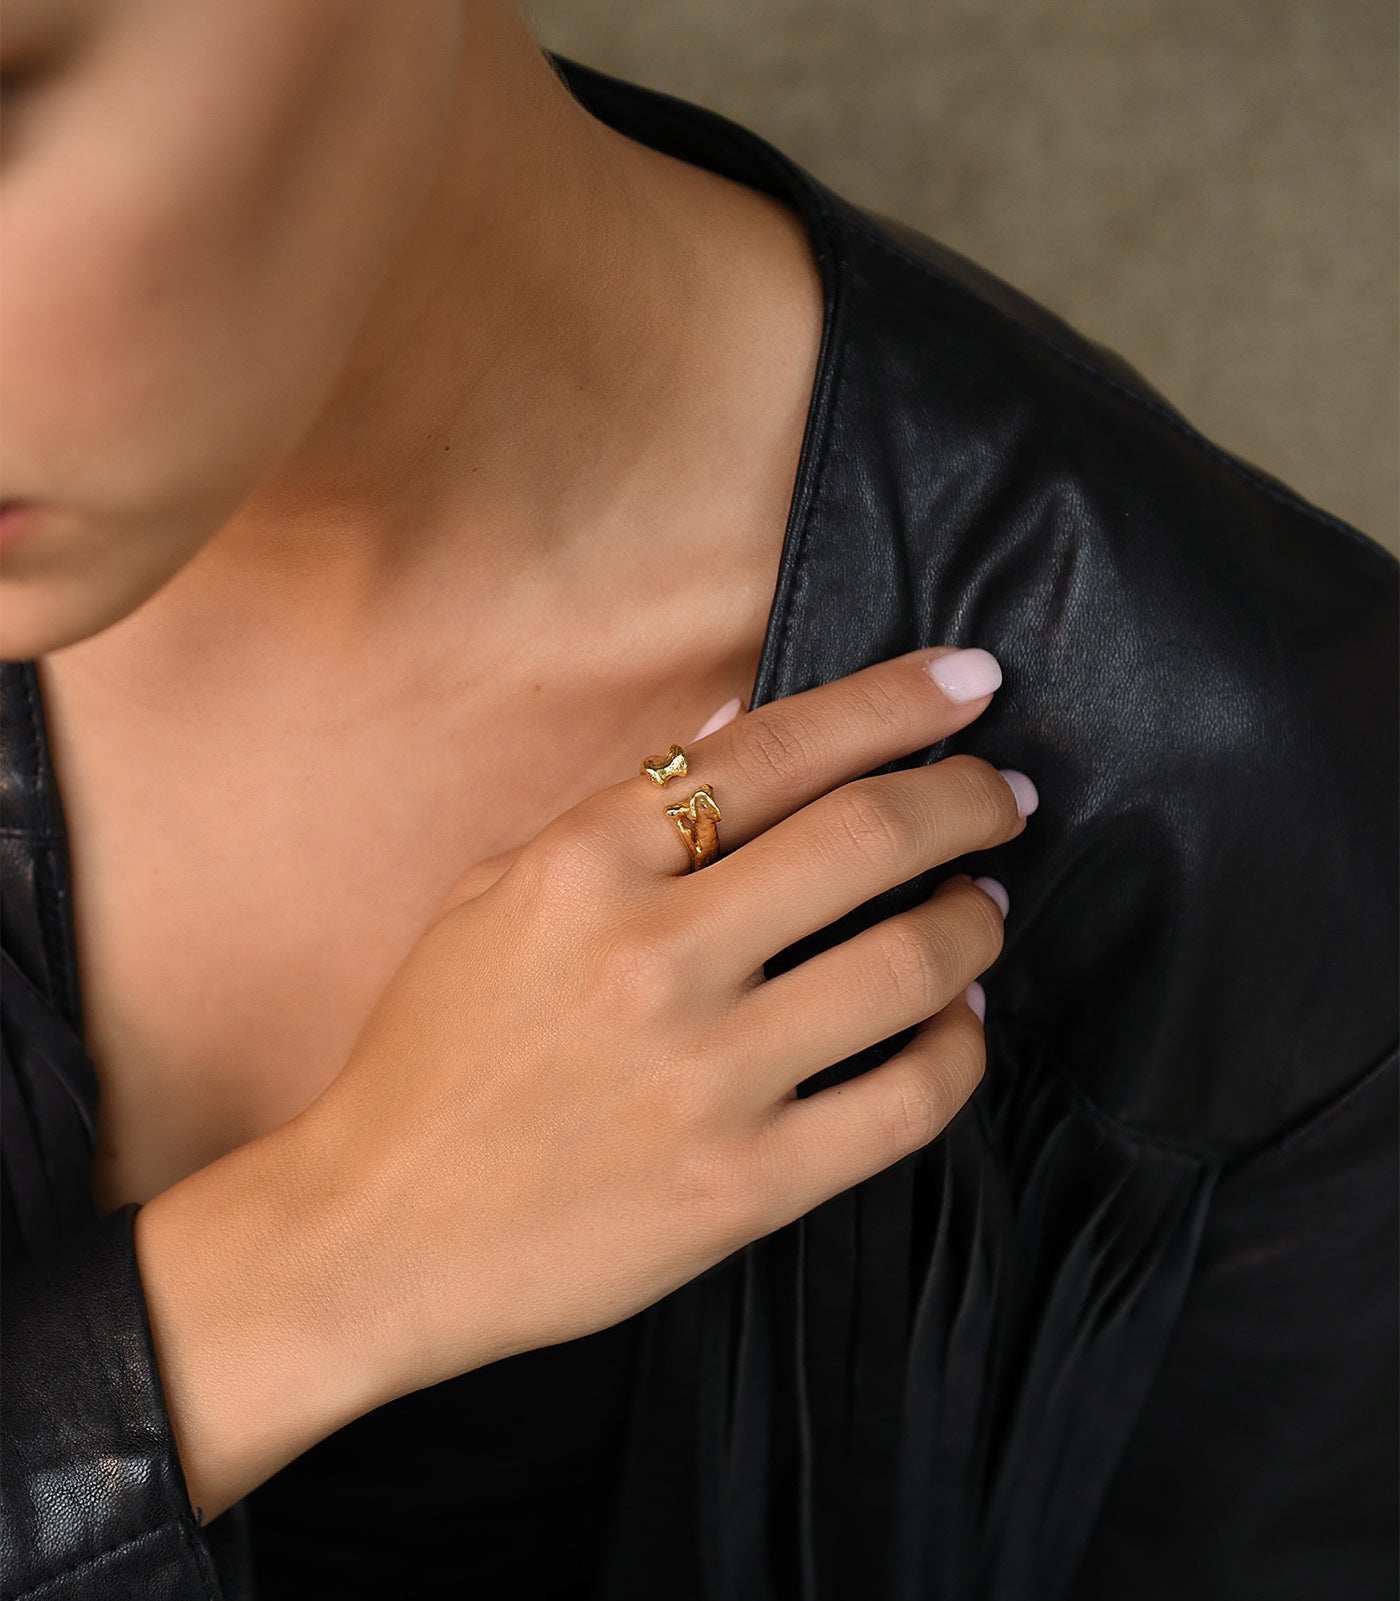 A model wears a gold vermeil ring with a bone shape. The ring has an open band design.